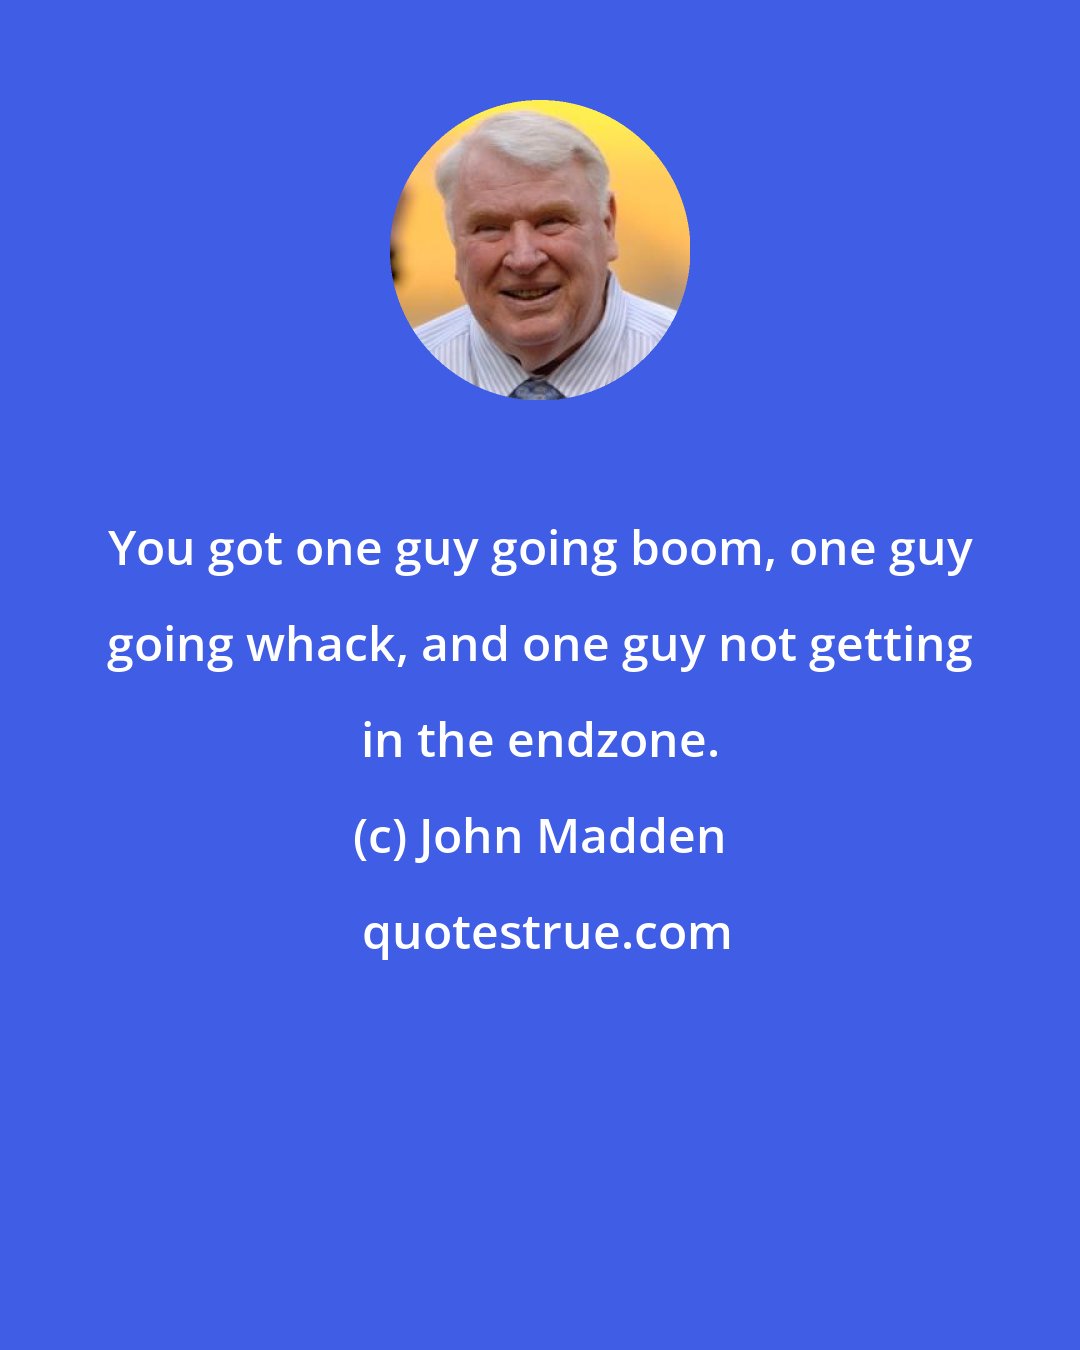 John Madden: You got one guy going boom, one guy going whack, and one guy not getting in the endzone.